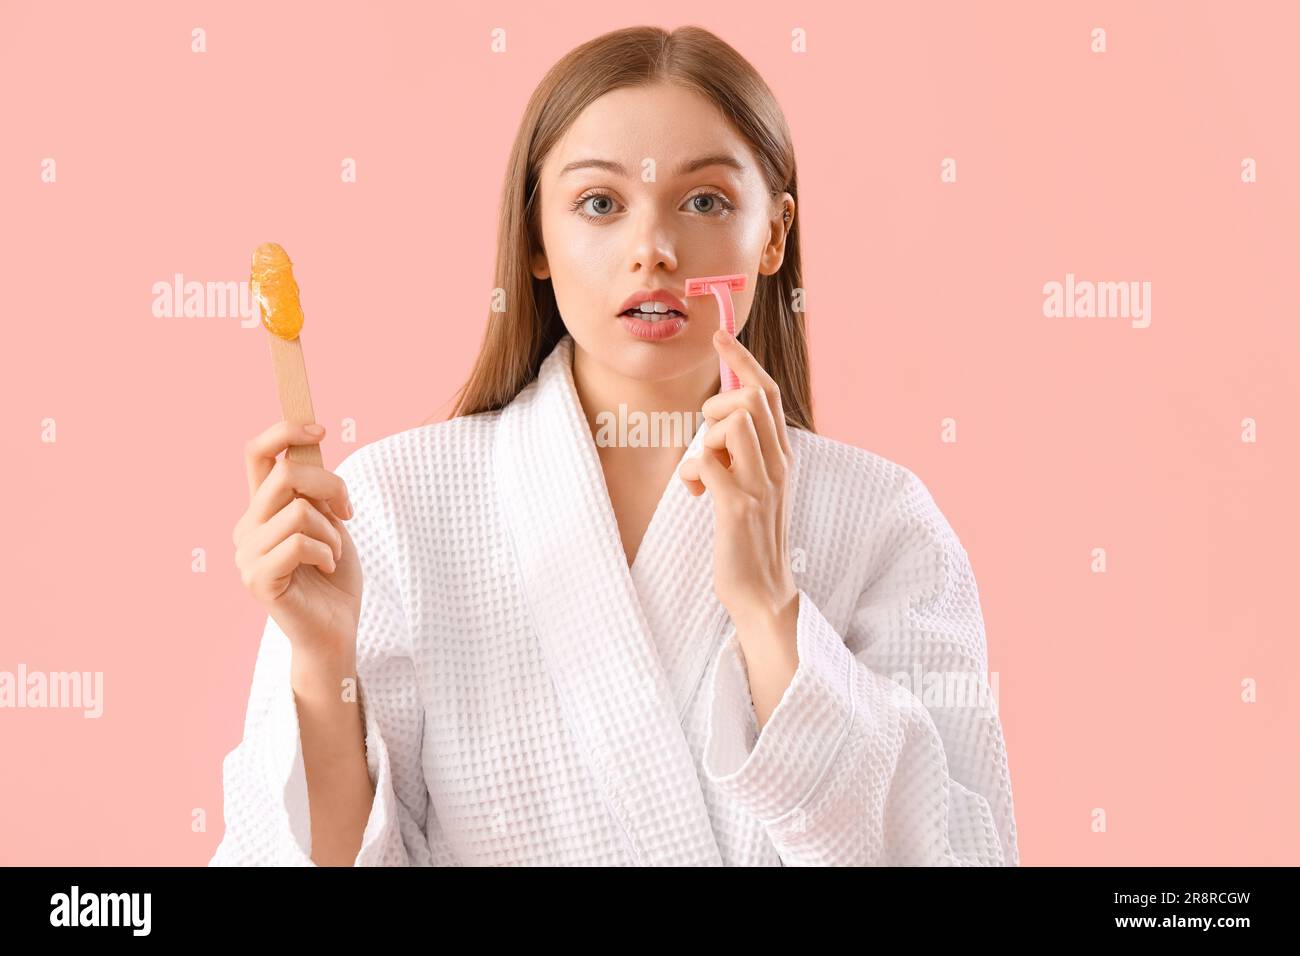 Young woman holding spatula with sugaring paste and razor on pink background Stock Photo